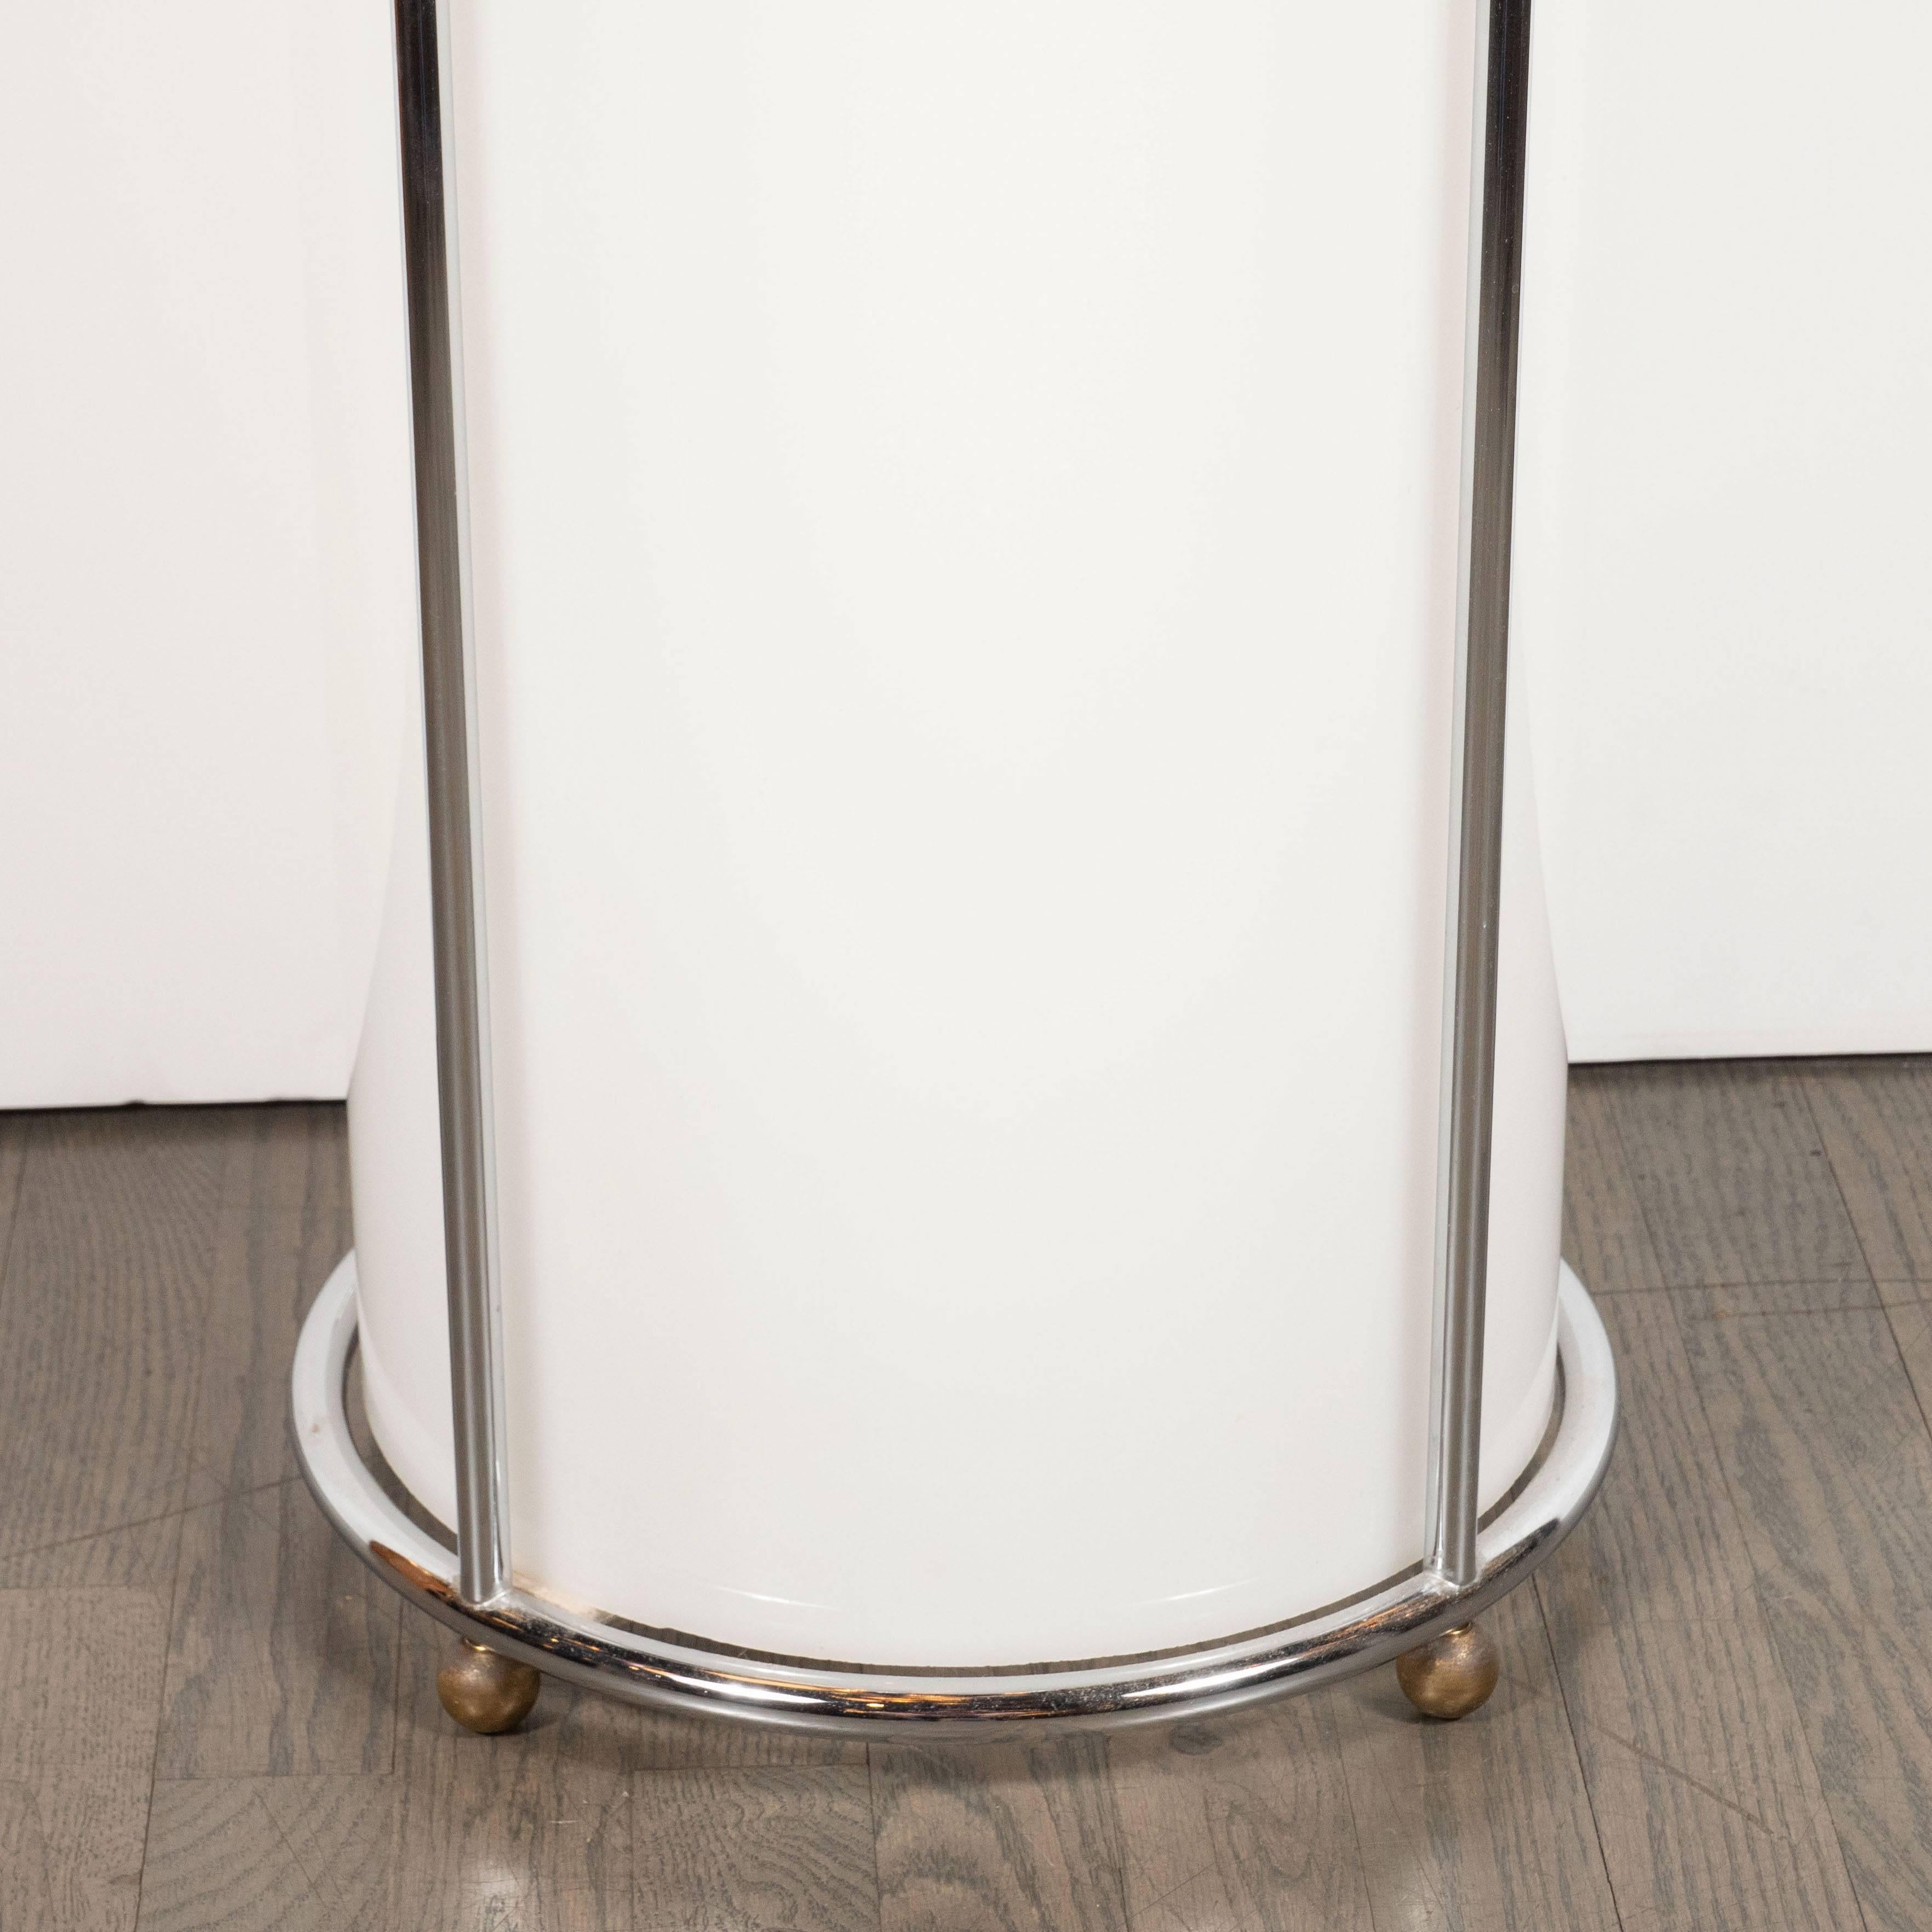 This gorgeous Art Deco pedestal offers a cylindrical opaque white plexi body with a circular polished chrome wrapped base and top, as well as spherical ball feet, also in chrome. Cylindrical chrome supports connect the base and the top, creating a